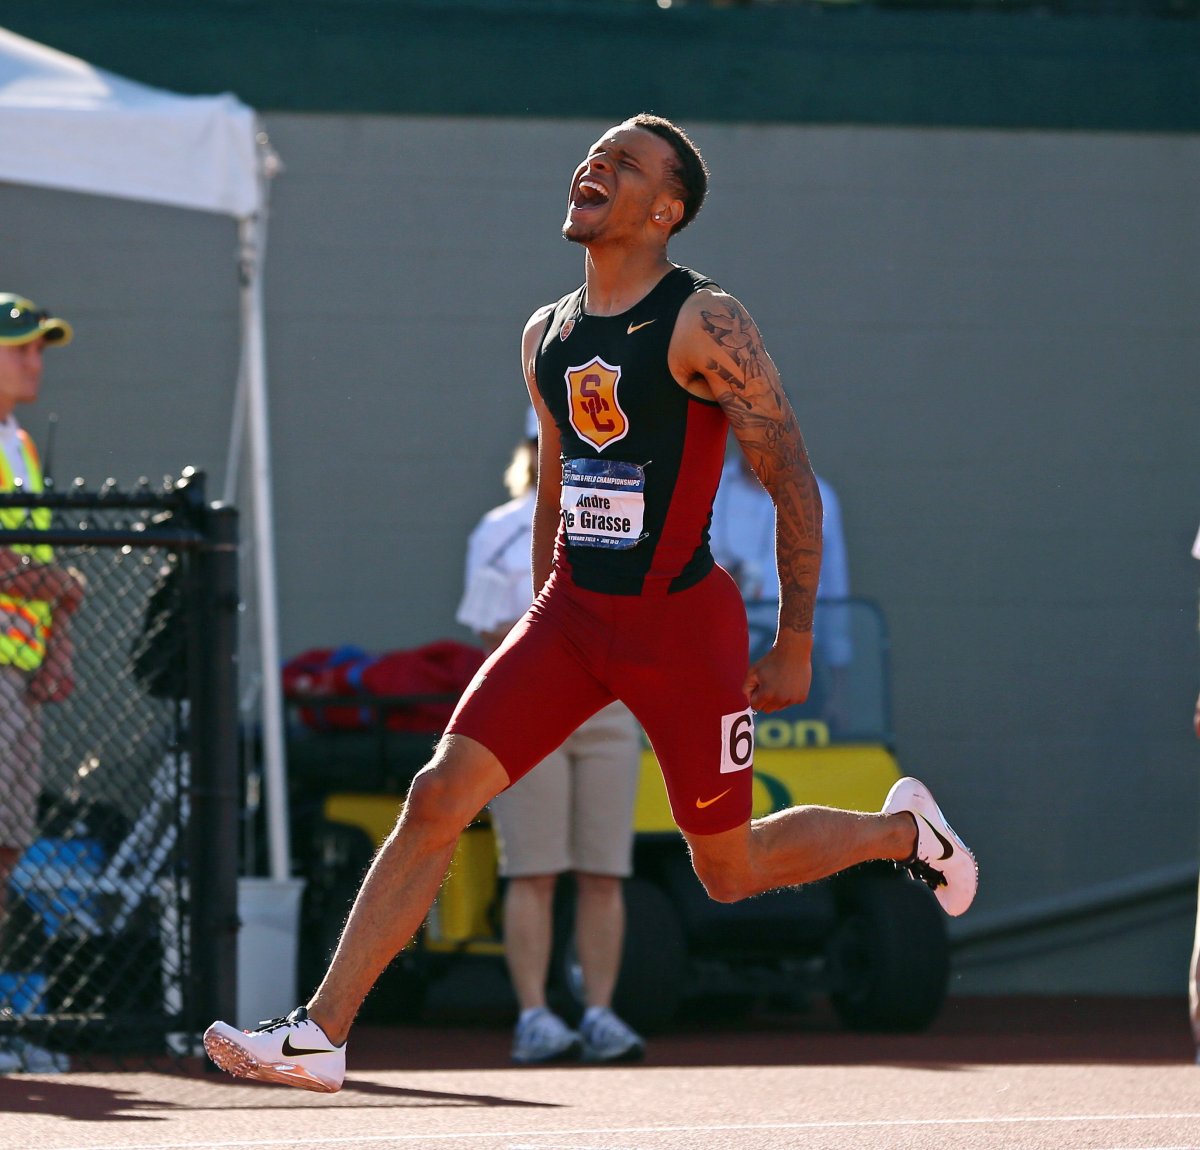 Canadian sprinter Andre De Grasse reacts after winning the 200-meter race during the NCAA track and field championships in Eugene, Ore., Friday, June 12, 2015.